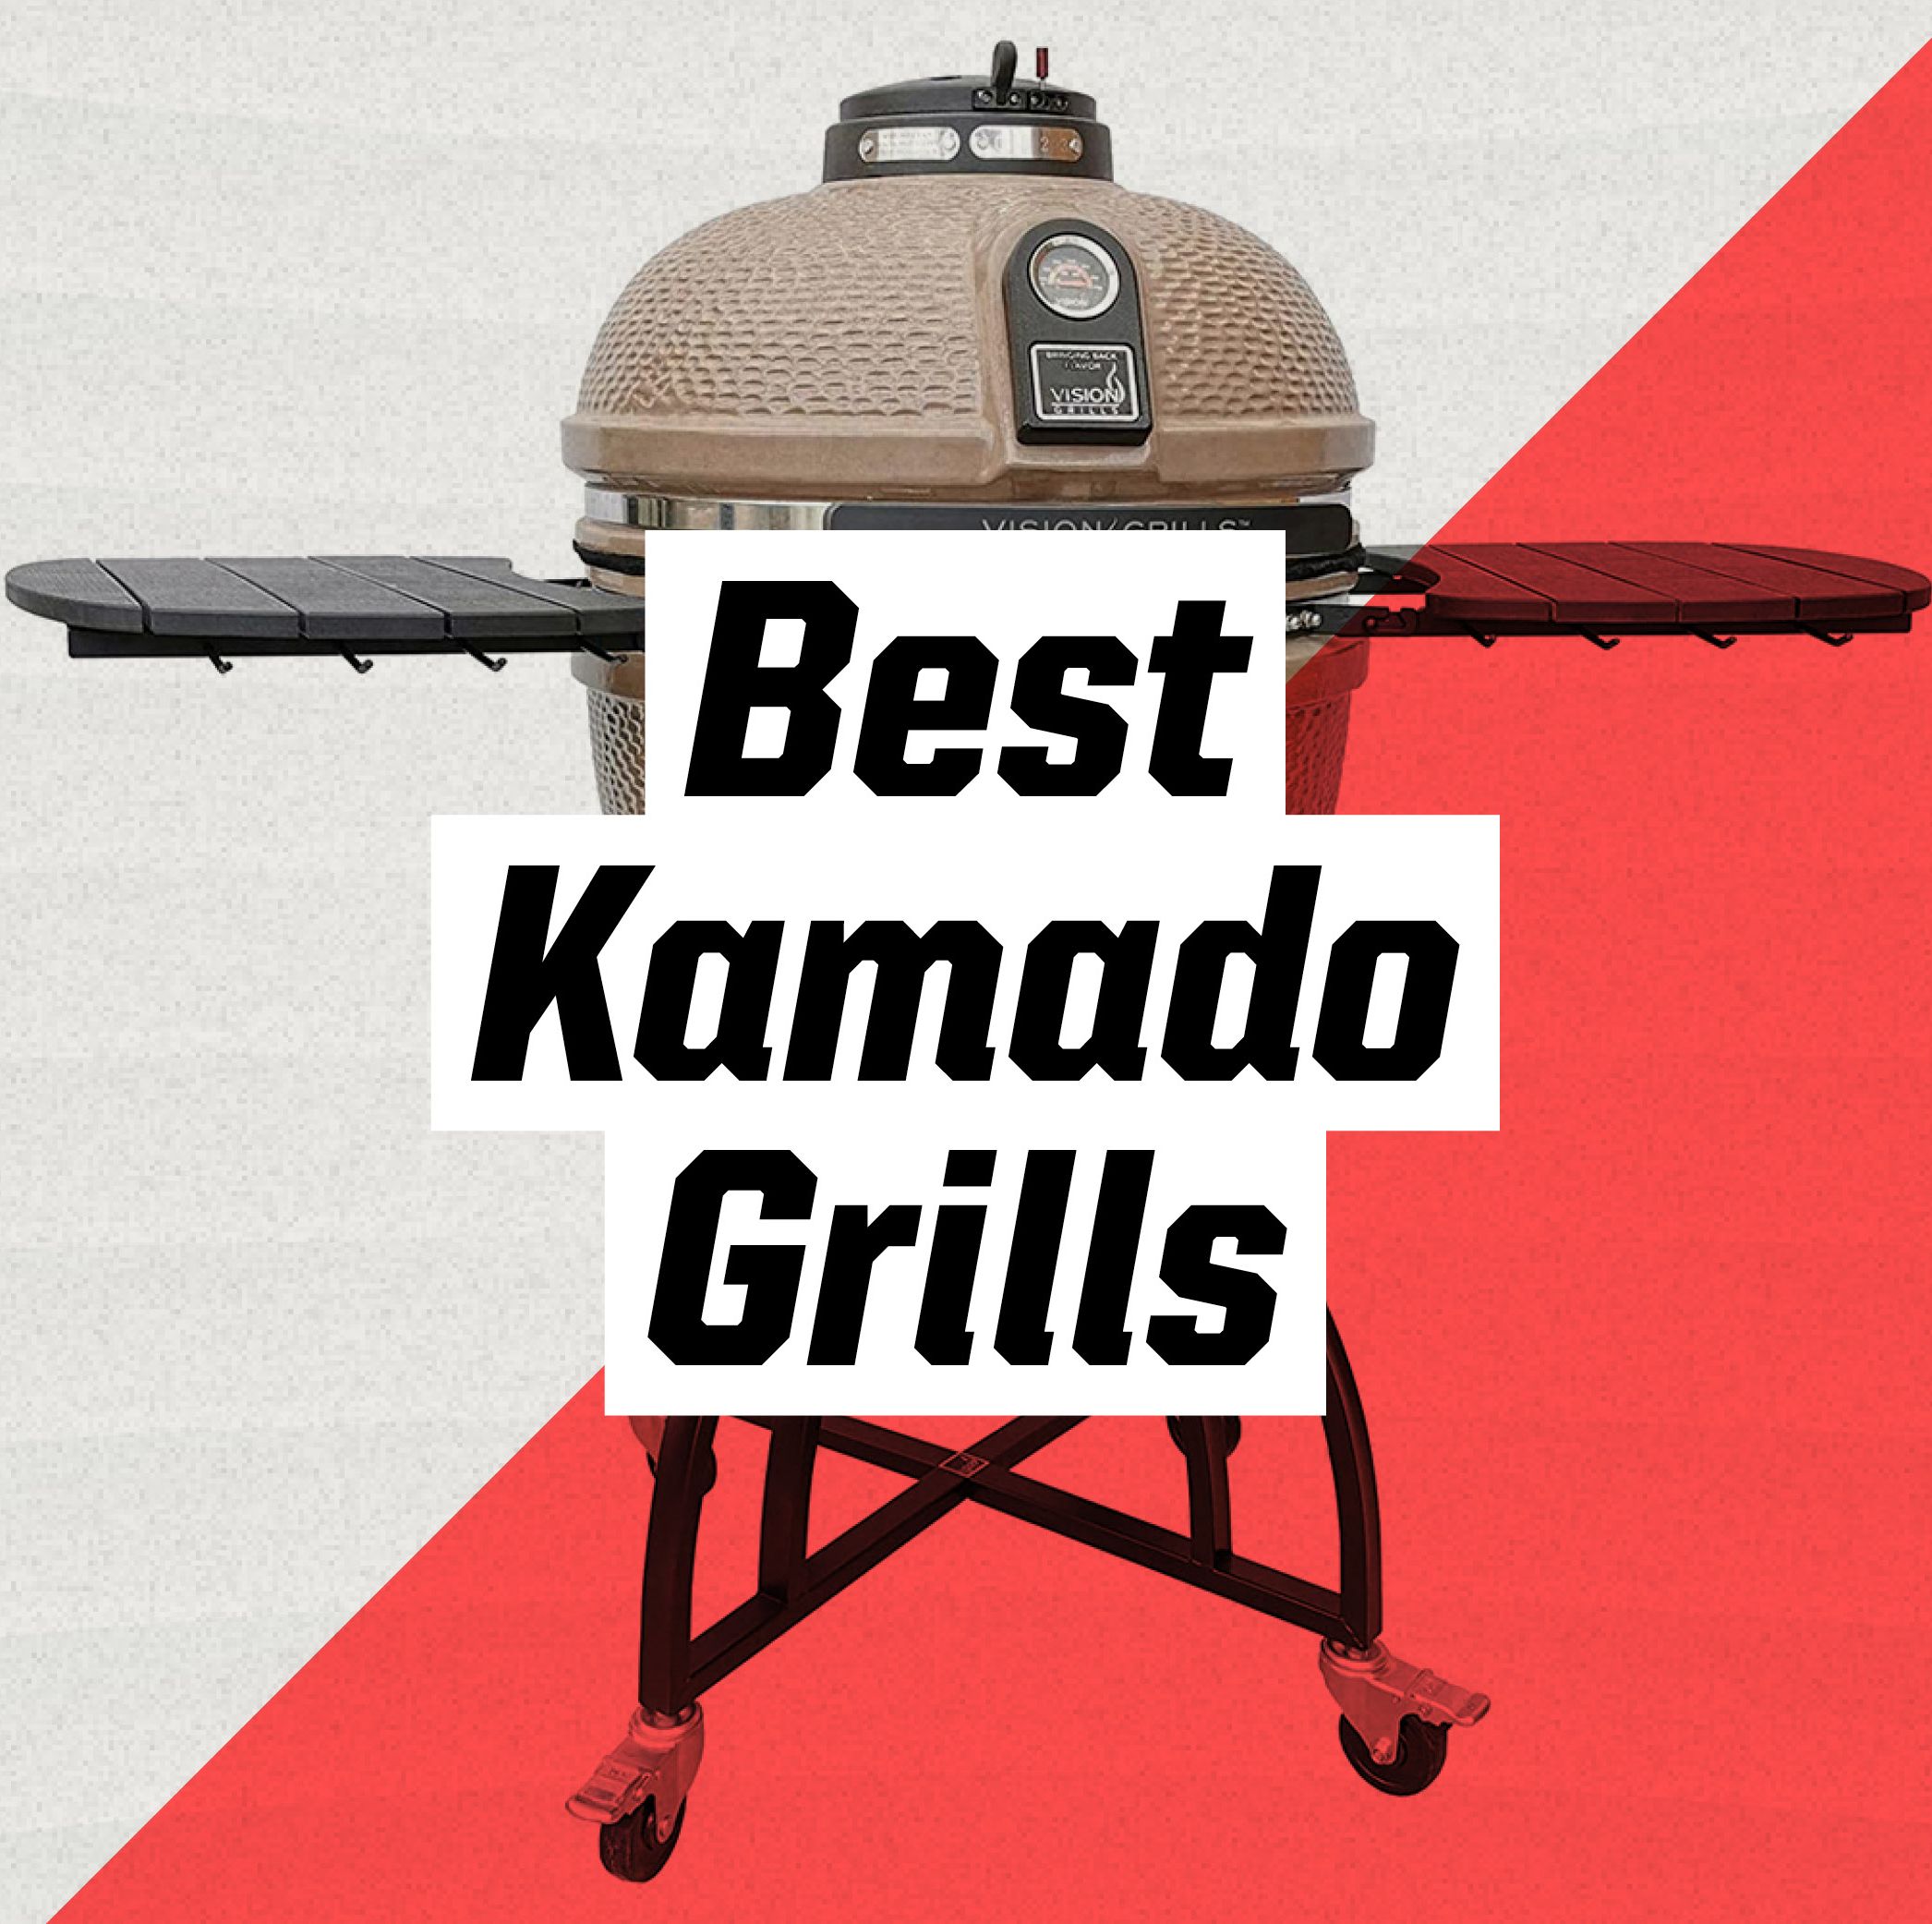 The Best Kamado Grills for the Ultimate Outdoor Cooking Experience